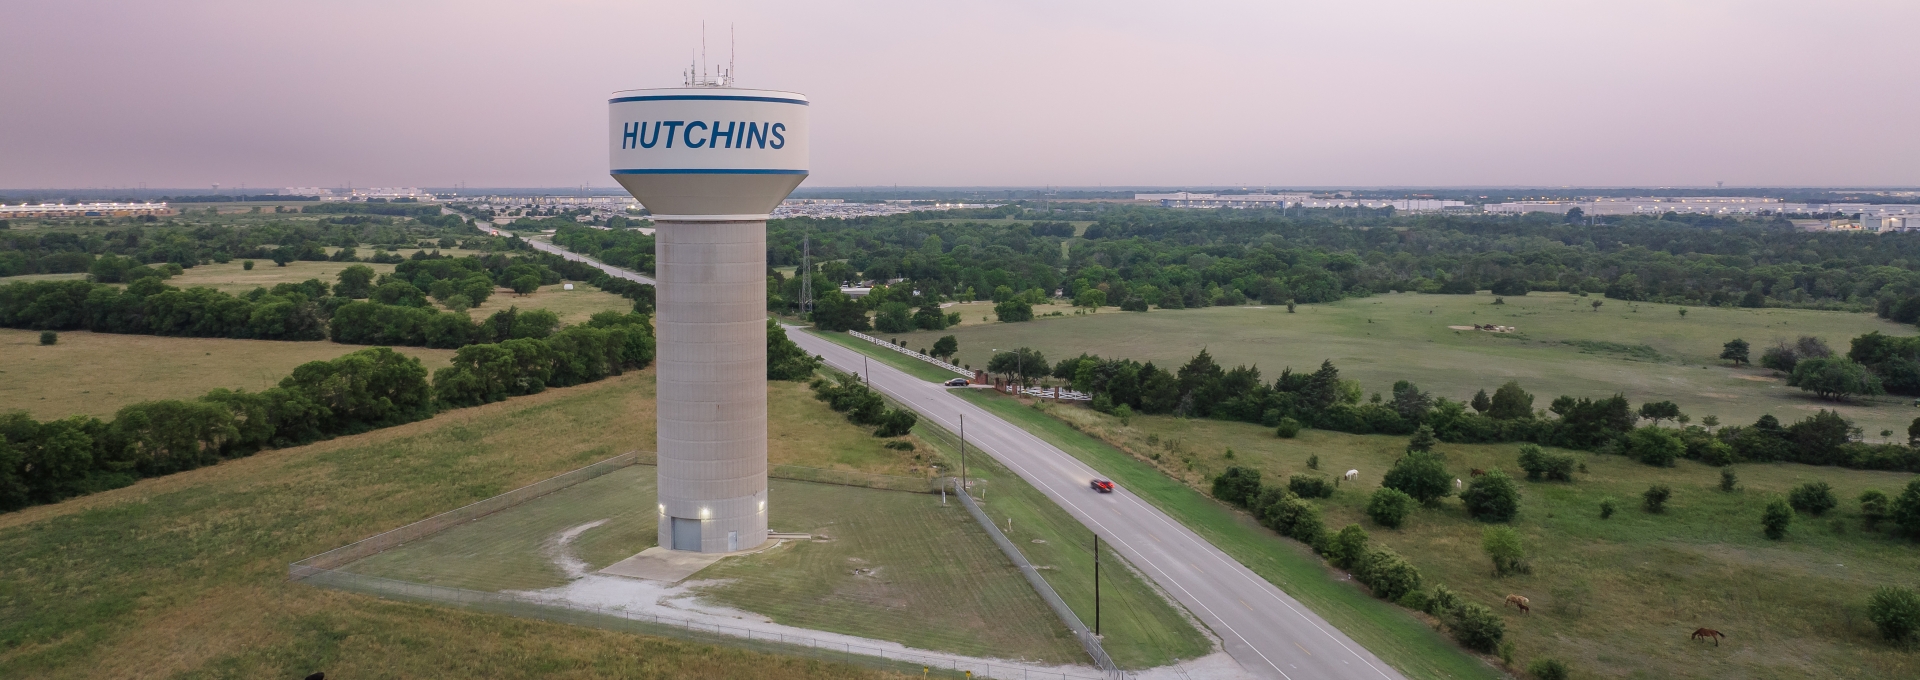 Photo of Hutchins Water Tower during sunset